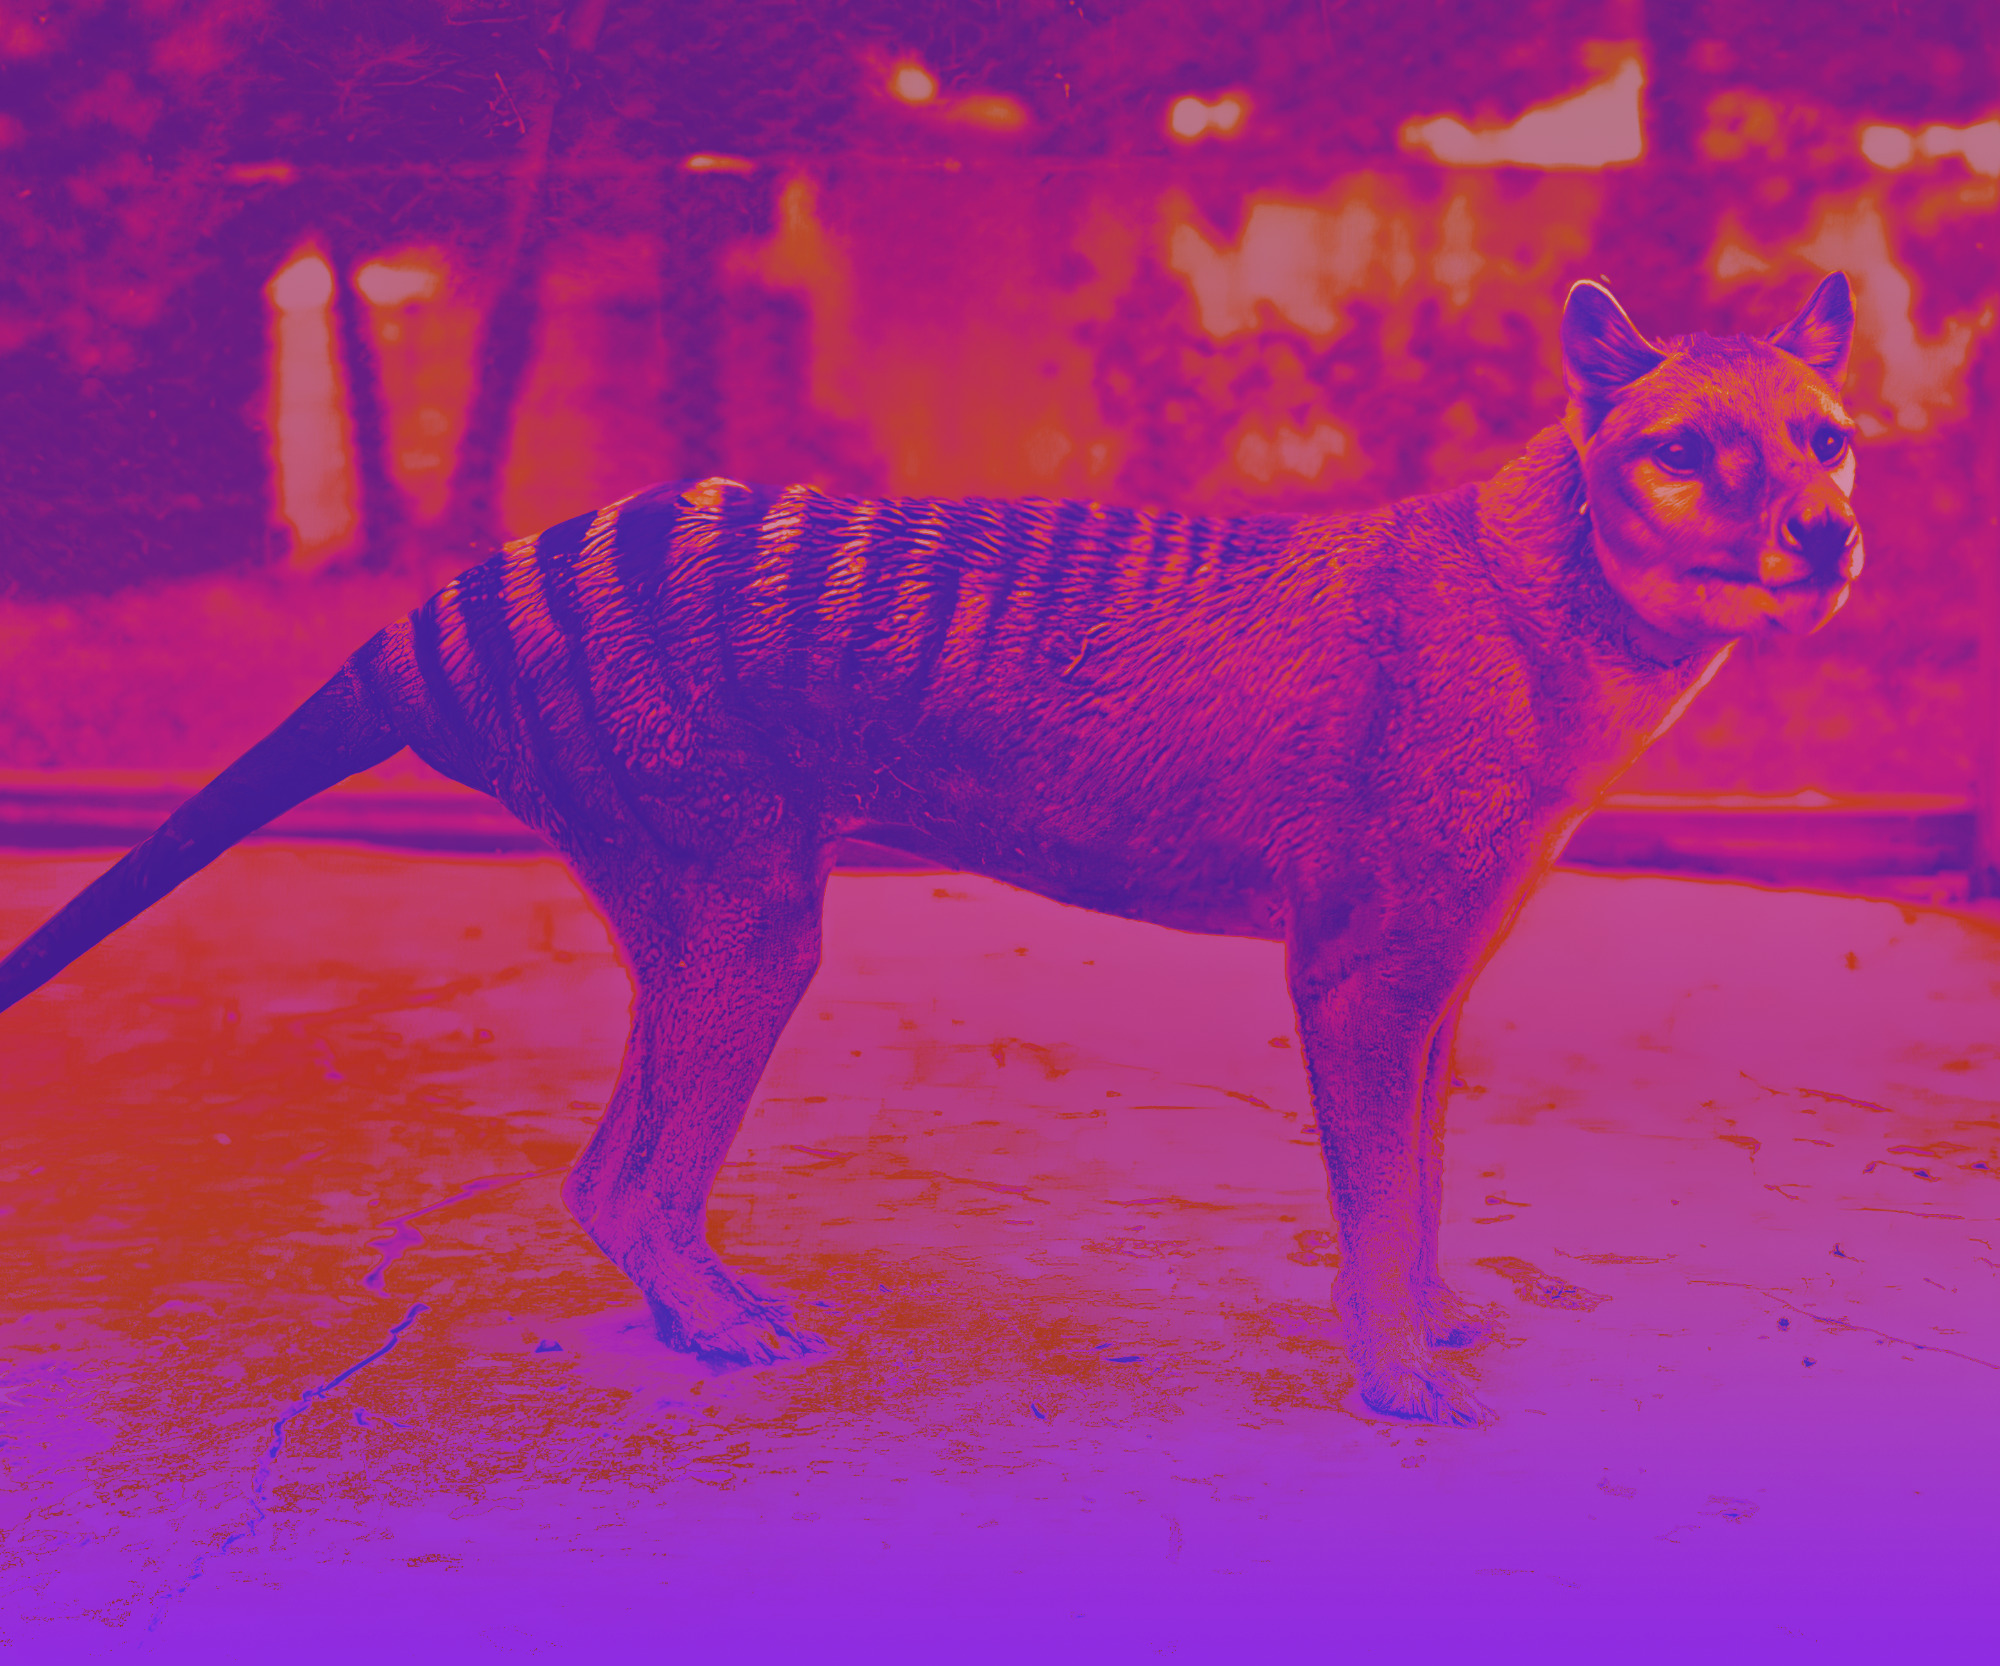 Could extinct Tasmanian tigers be brought back from the dead?